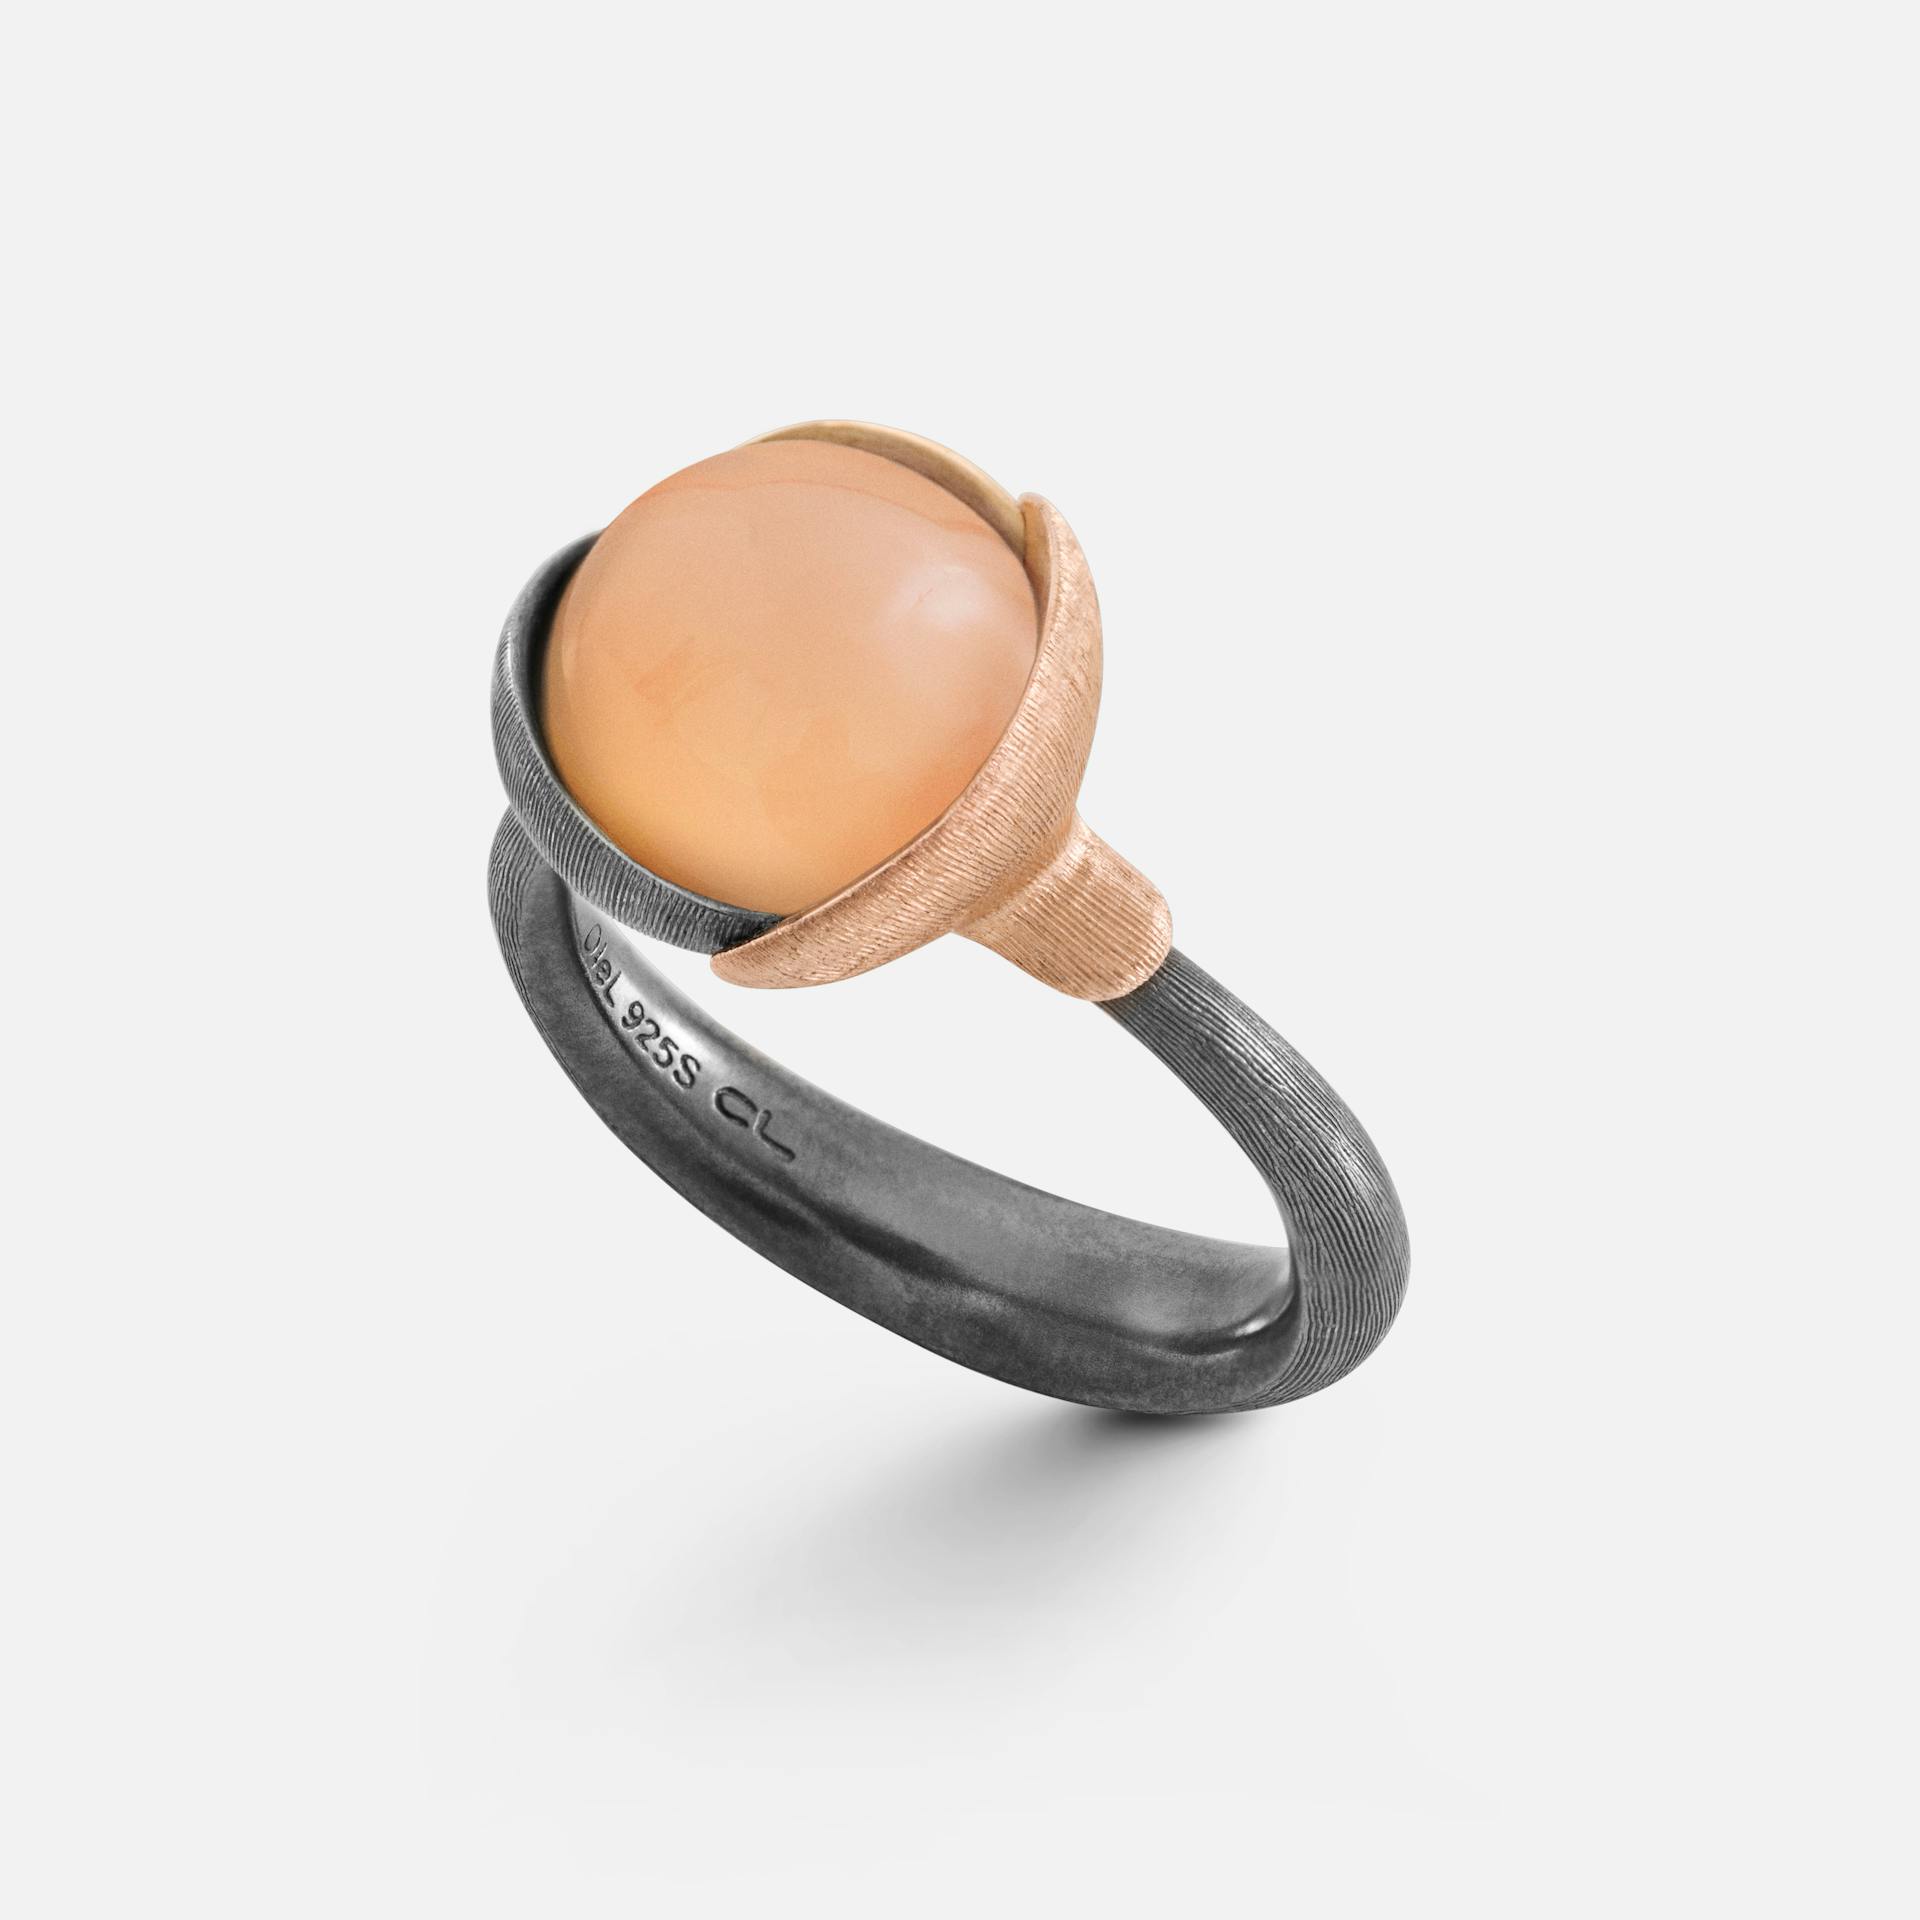 Lotus Ring size 2 in Gold & Oxidized Sterling Silver with Blush Moonstone  |  Ole Lynggaard Copenhagen